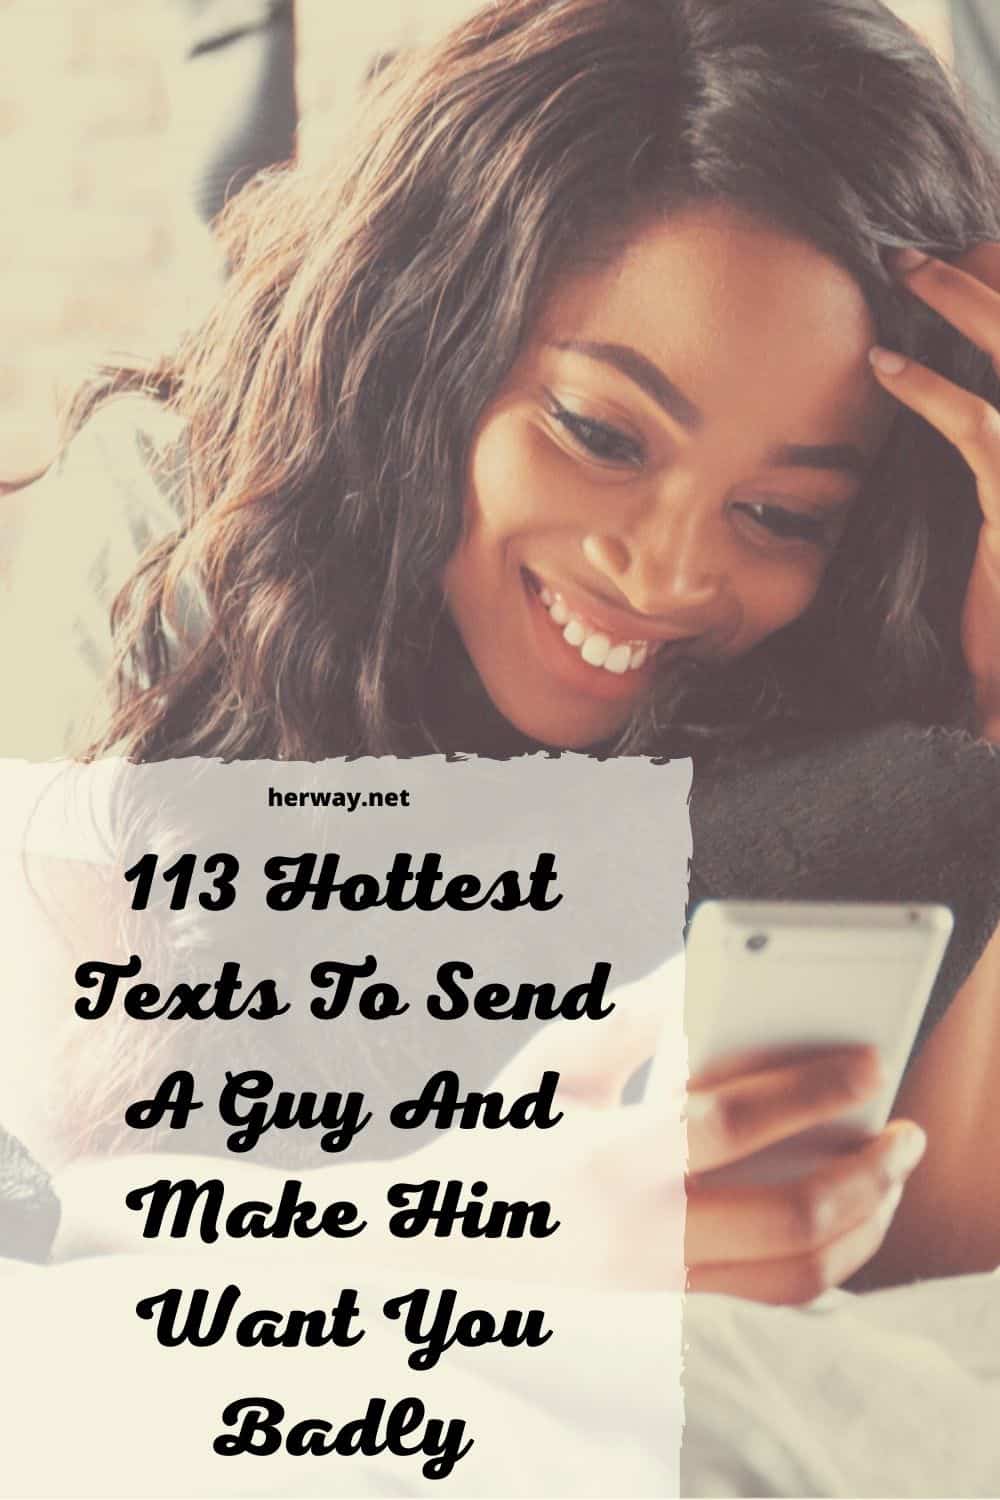 Messages sexy 100+ Examples